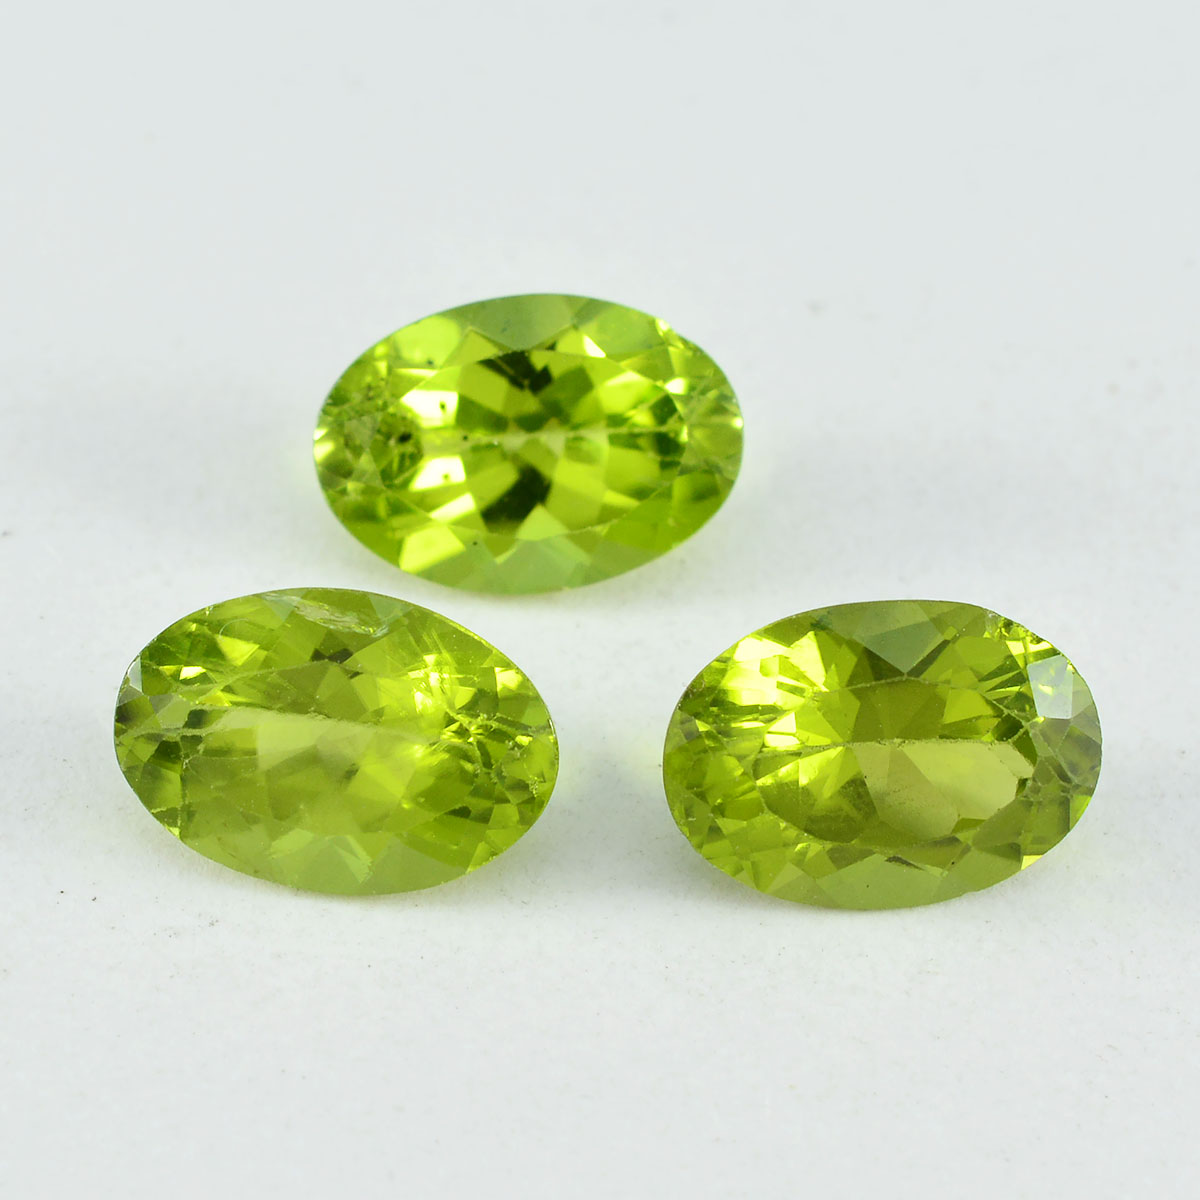 Riyogems 1PC Genuine Green Peridot Faceted 8x10 mm Oval Shape nice-looking Quality Stone